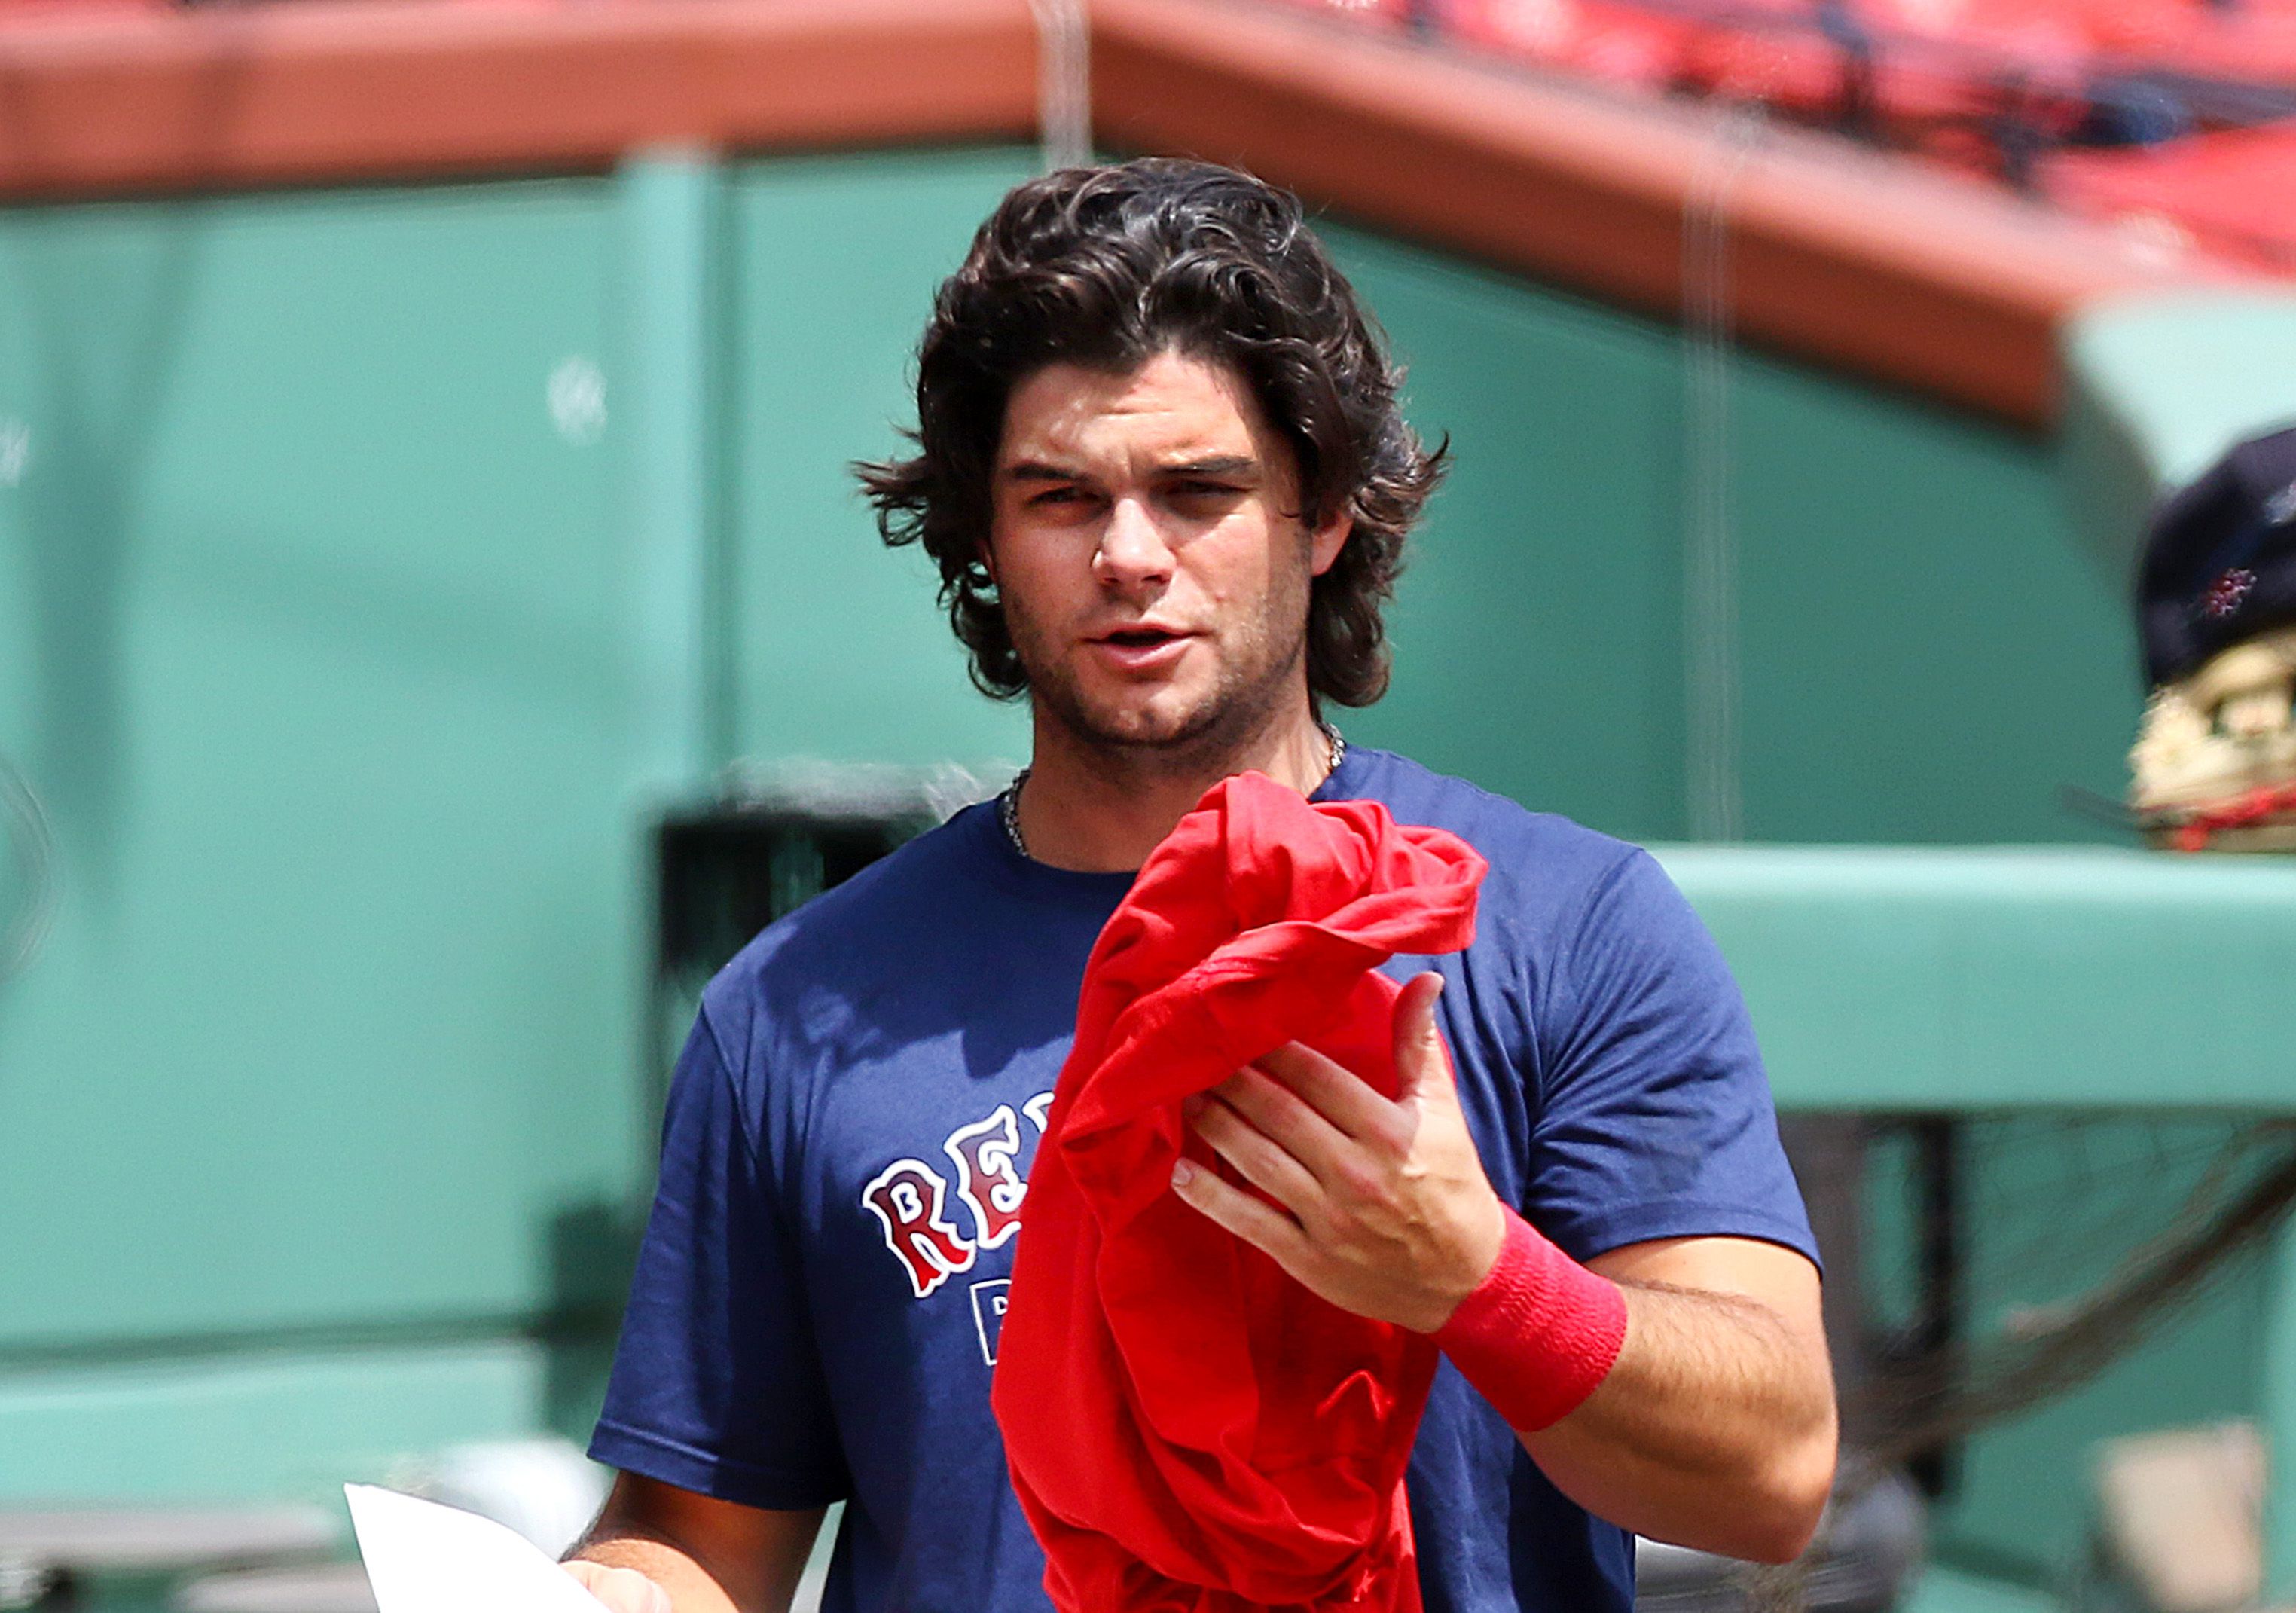 Andrew Benintendi says he's excited to be with Royals, but will